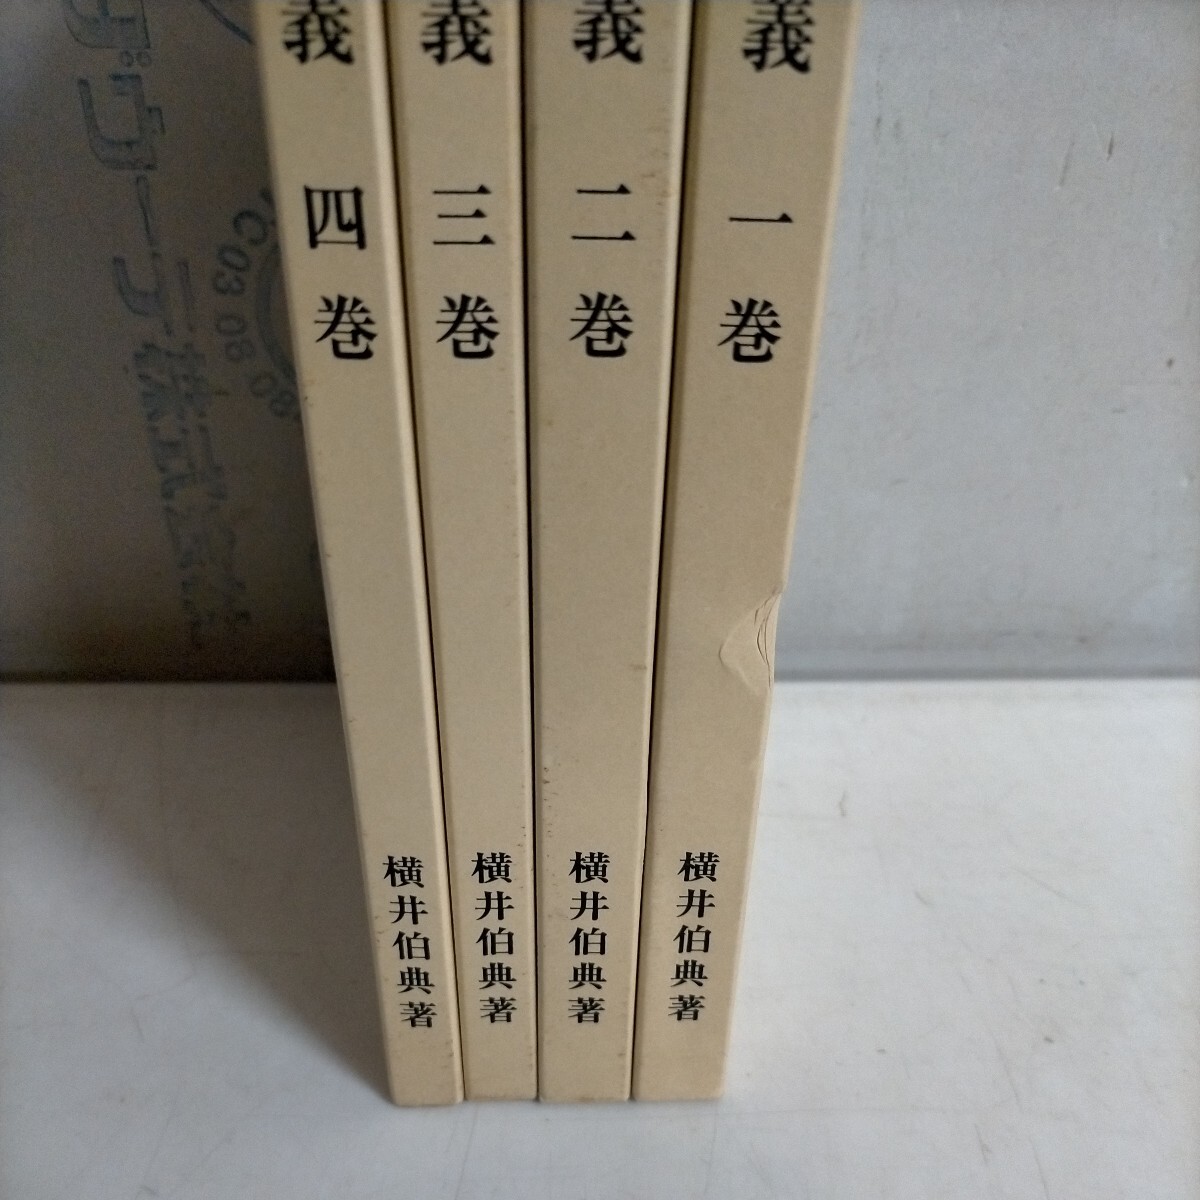  width ....... Japan better fortune .. all 4 volume .^ secondhand book / aged deterioration because of scorch attrition some stains scratch have / study of divination / divination 